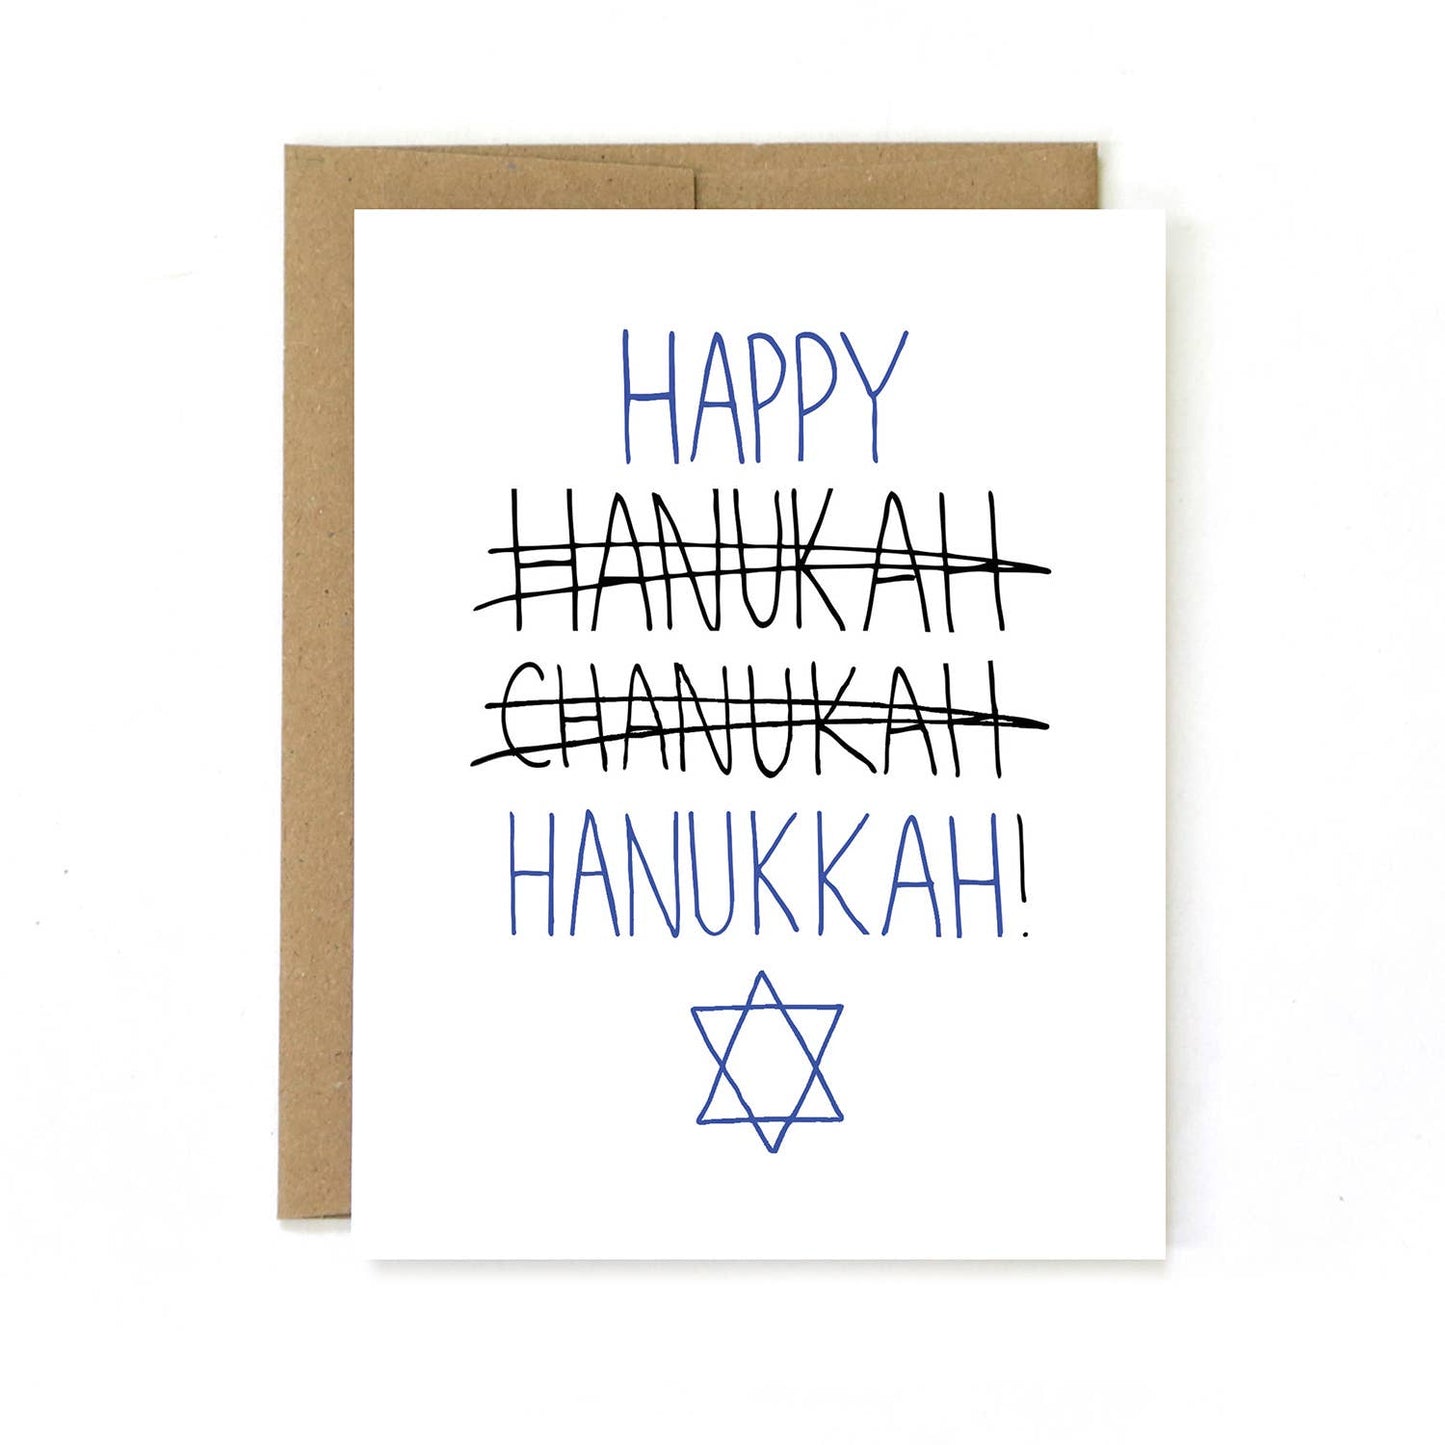 Hanukkah Holiday Card - Recycled Paper - Spelling